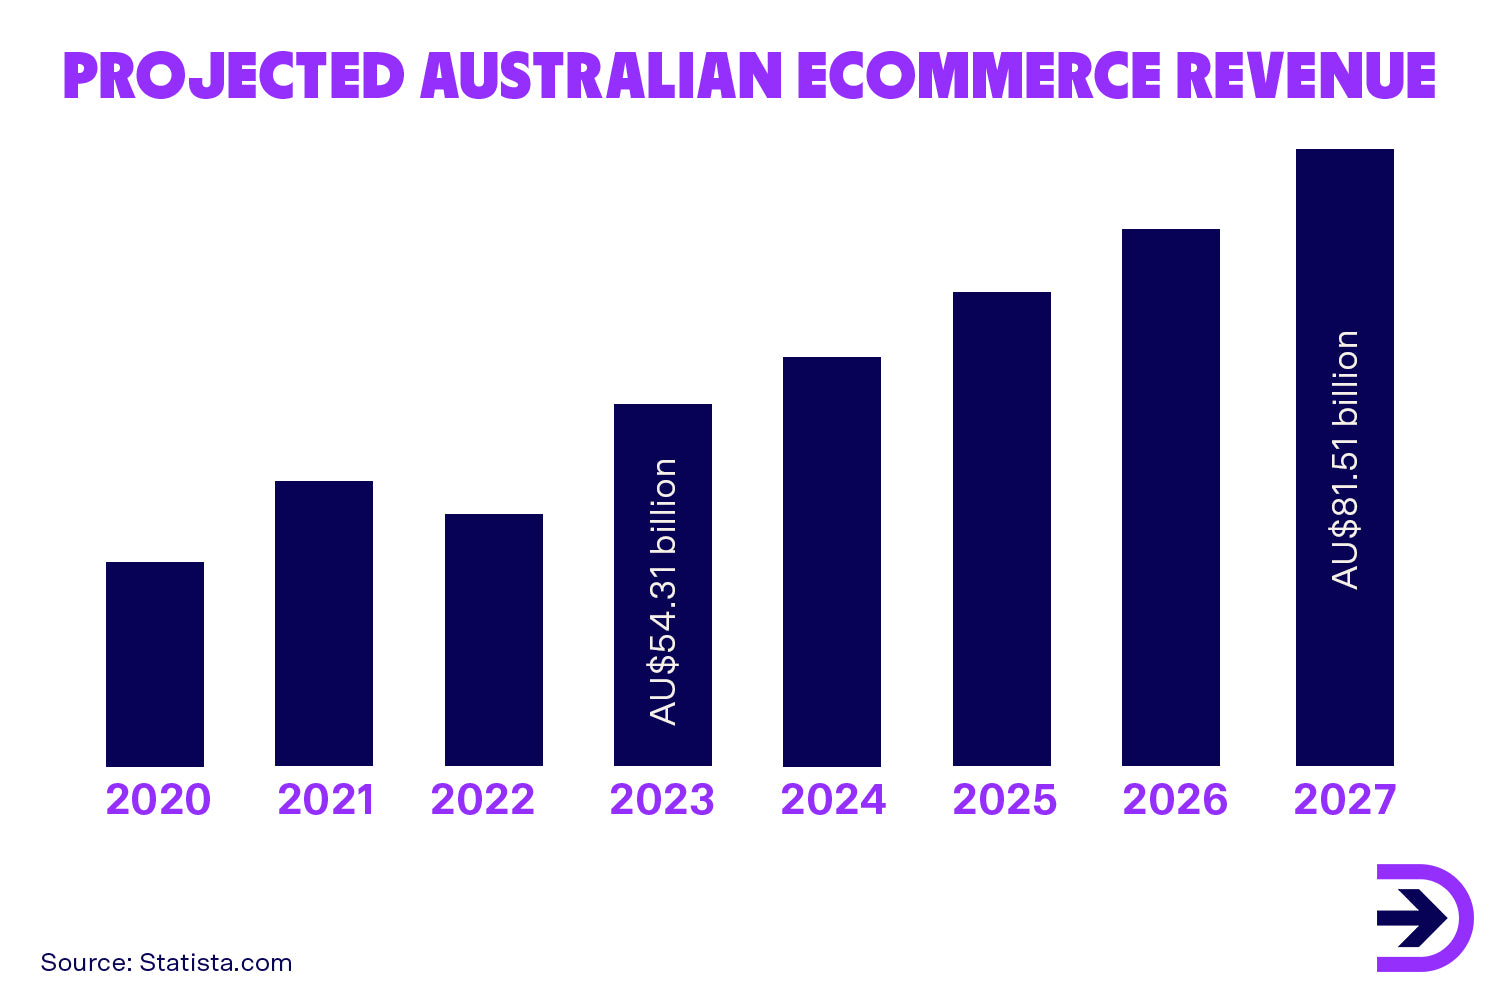 The Australian ecommerce market is expected to grow to approximately over $81 billion by 2027.